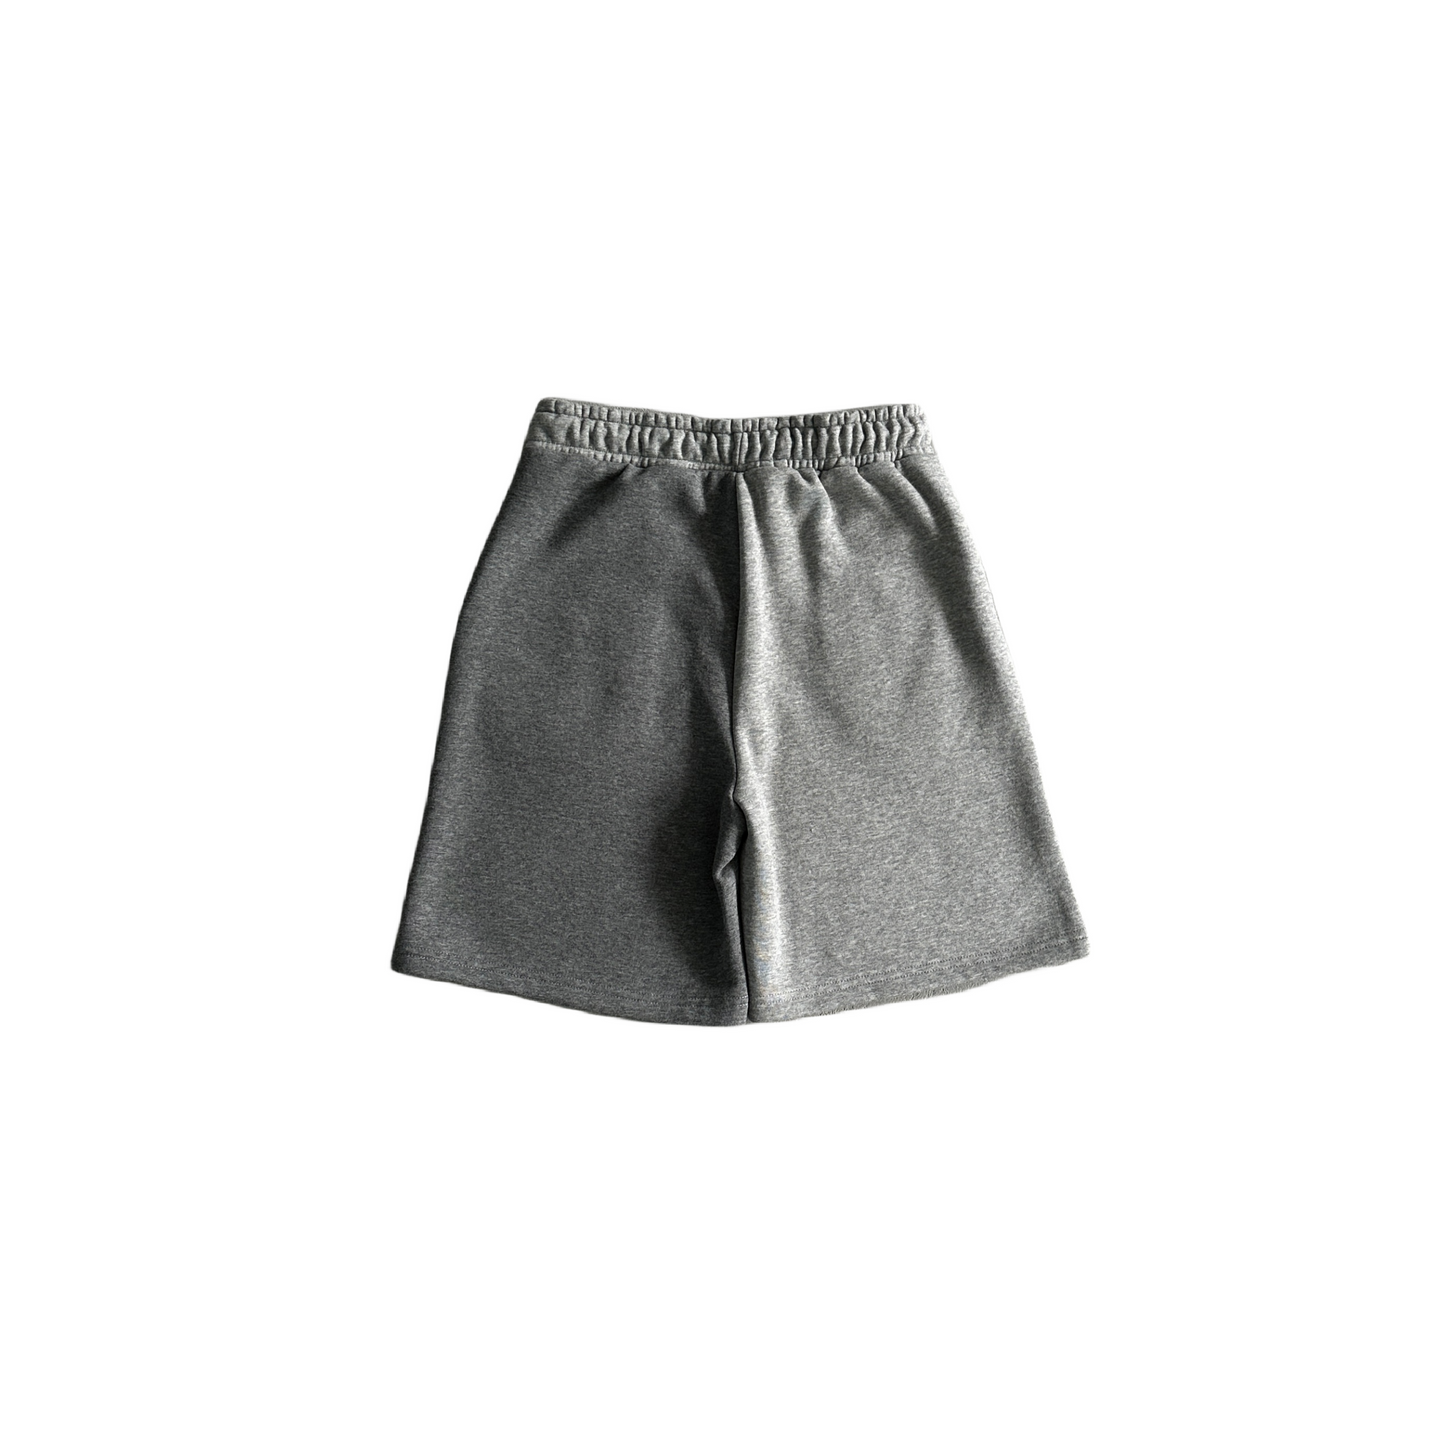 Trapstar Arch Shooters Short Set - White with Grey